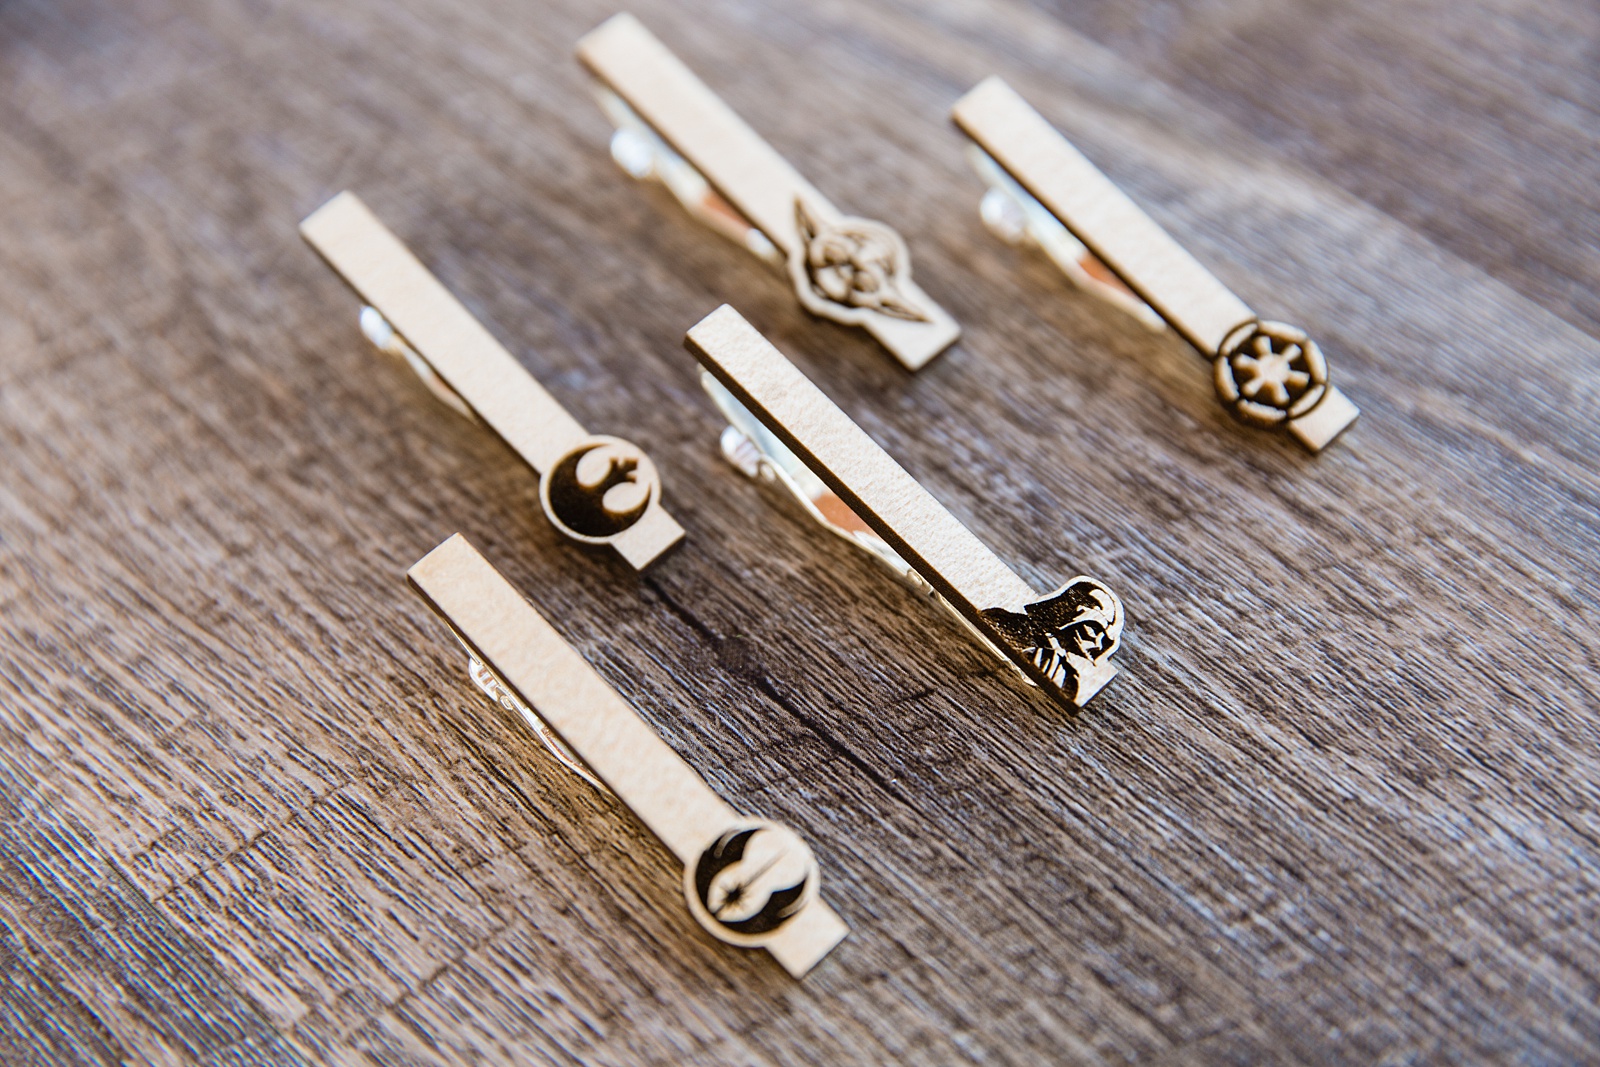 Unique and nerdy groomsmen gifts of wooden Star Wars tie clips by Arizona wedding photographer PMA Photography.